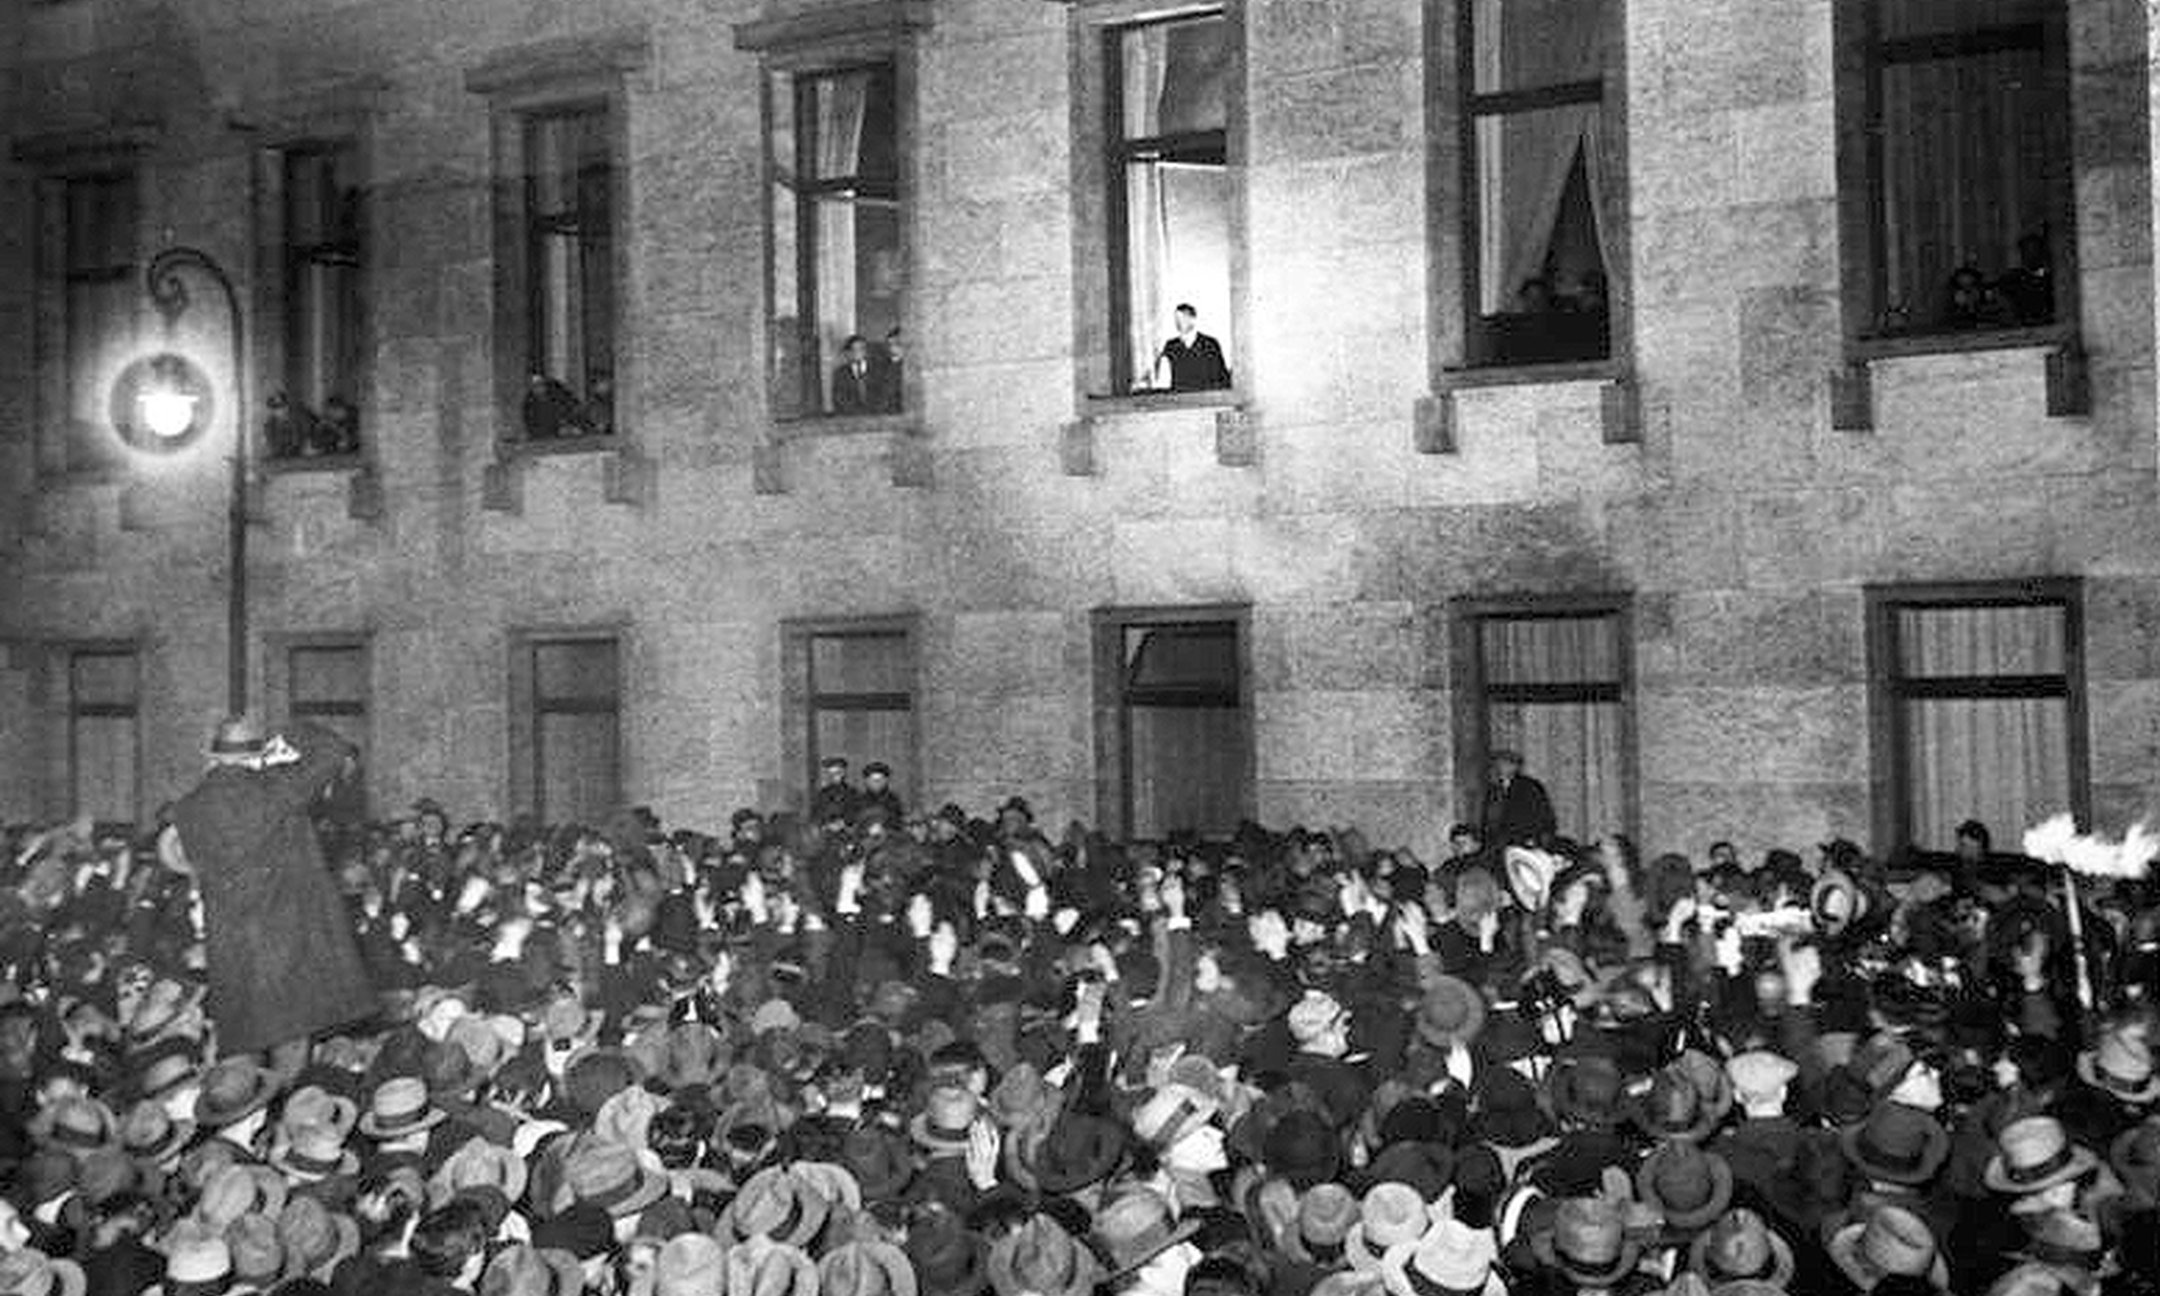 Adolf Hitler waves from the chancellery to the jubilant crowd. They celebrate his appointment as Chancellor of Germany.